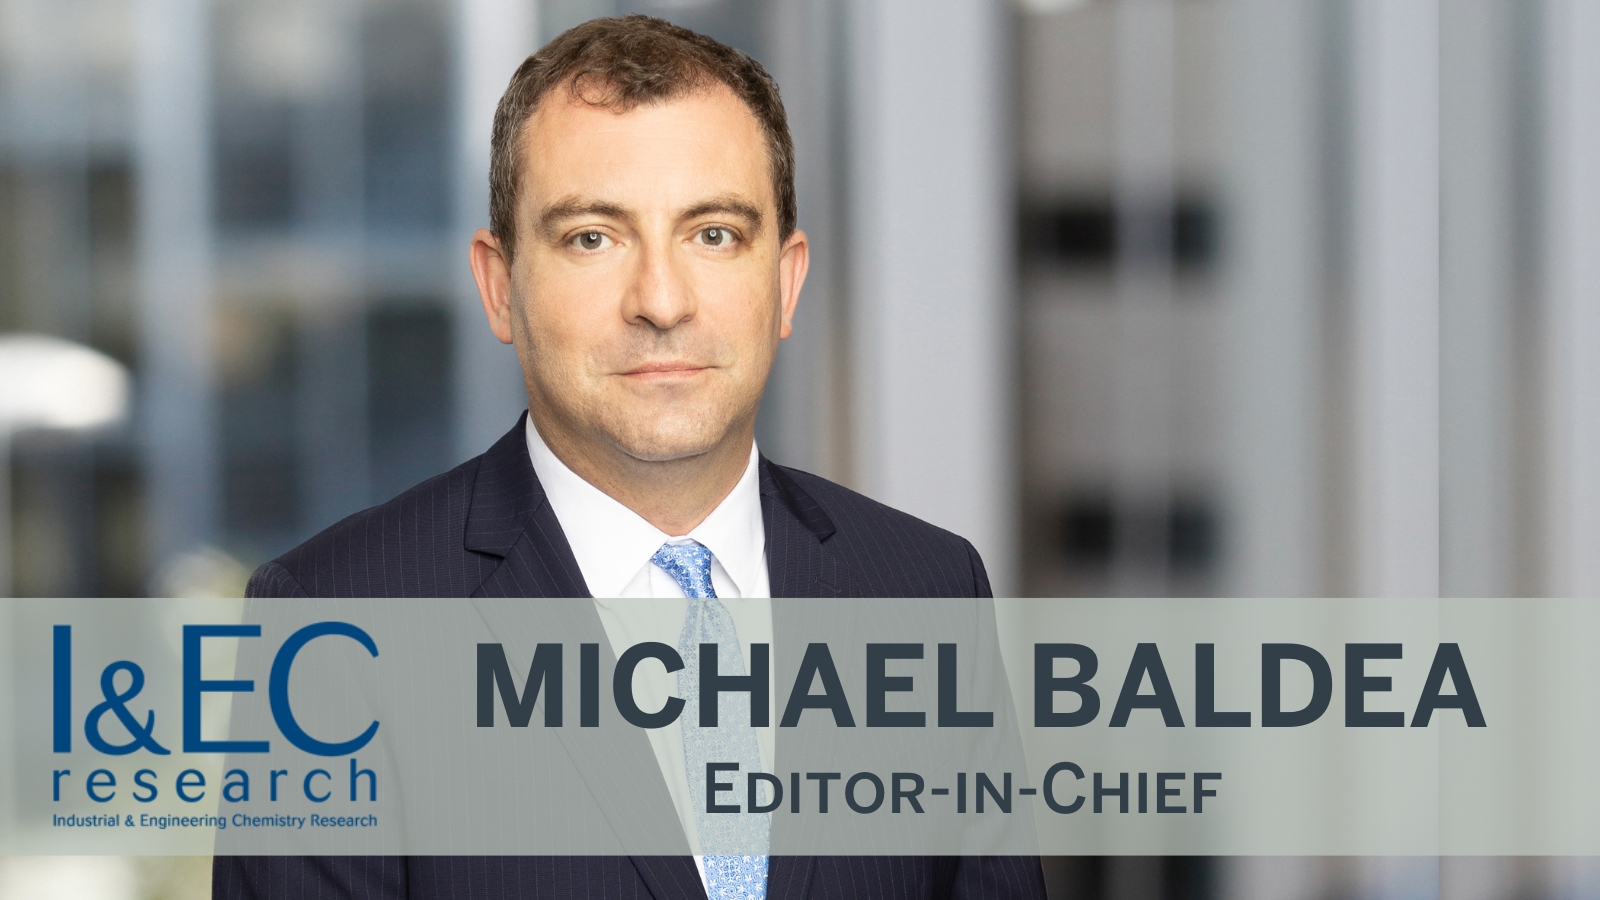 Michael Baldea named Editor-in-Chief at Industrial &amp; Engineering Chemistry Research journal